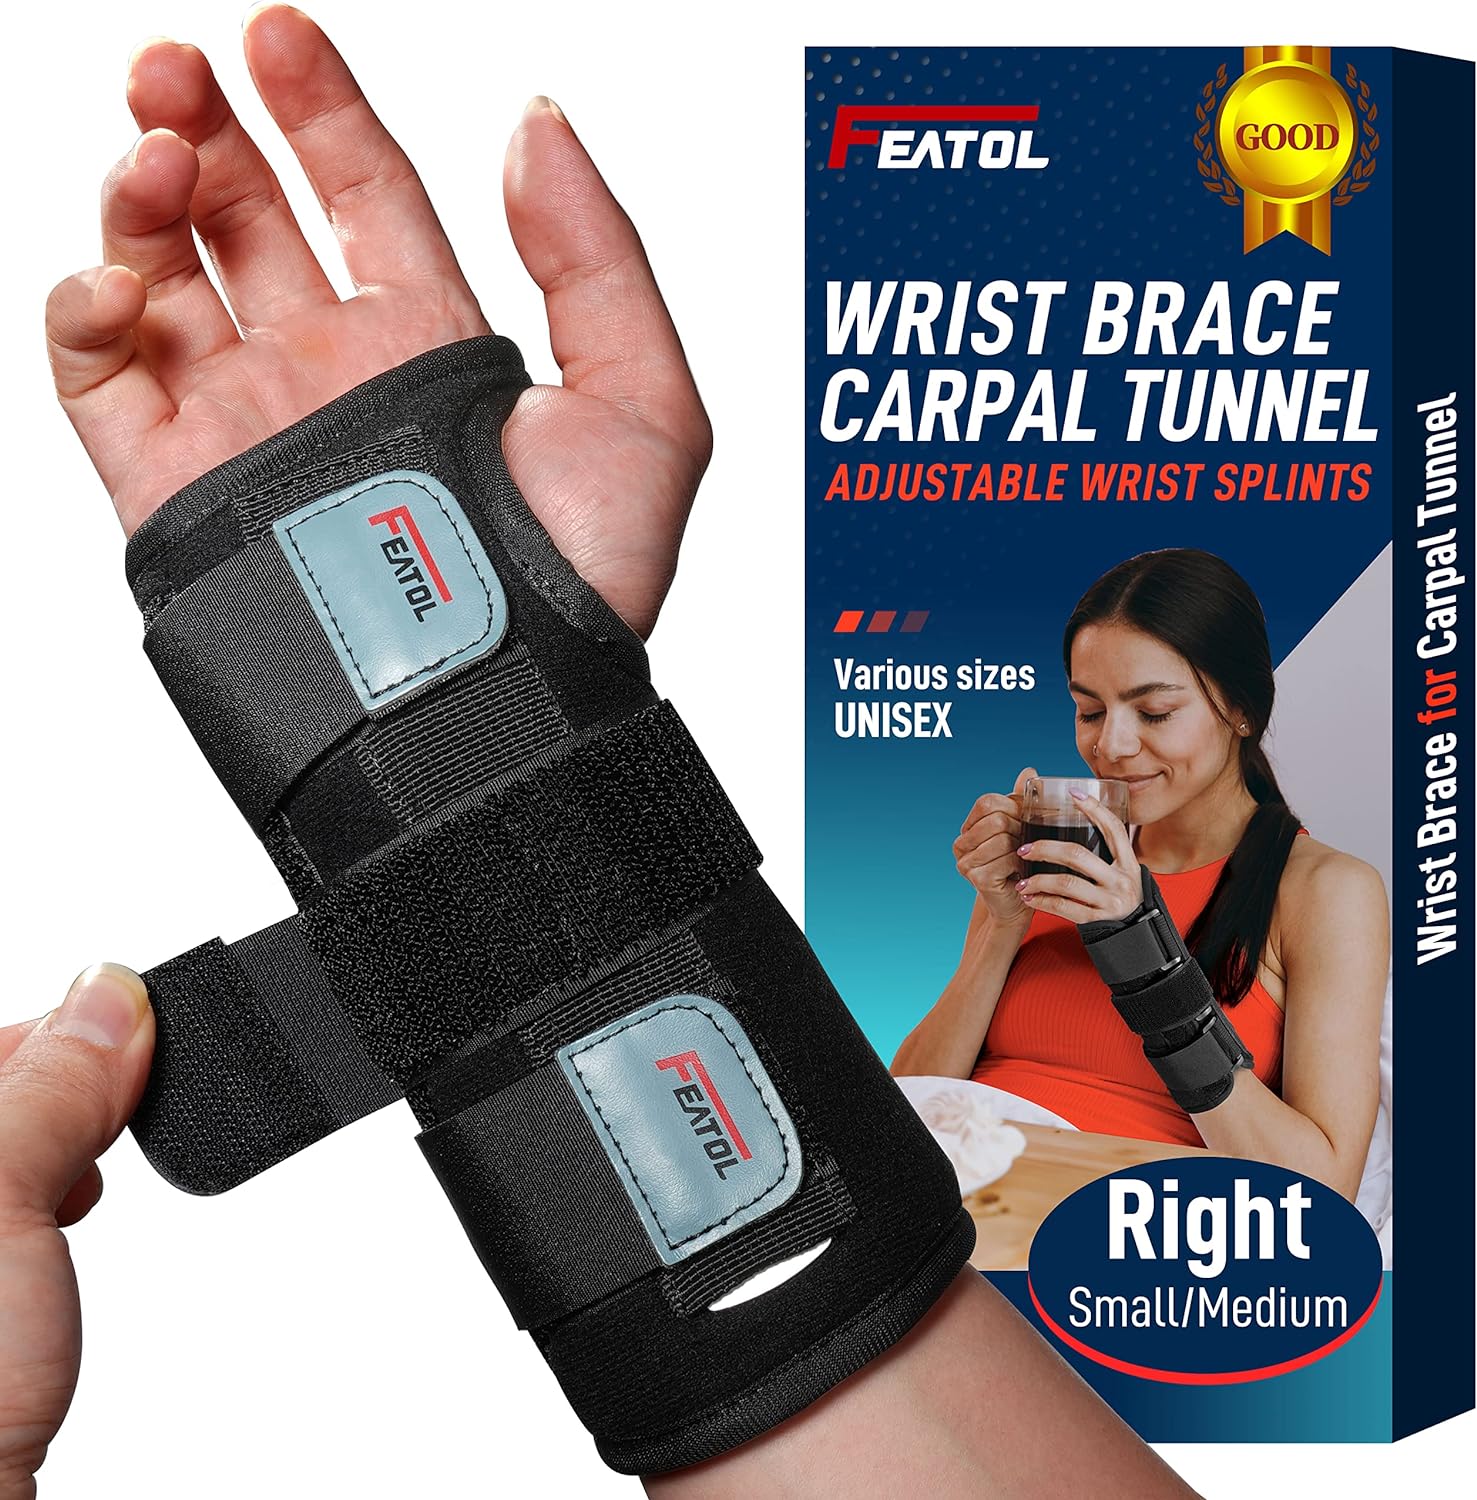 FEATOL Wrist Brace for Carpal Tunnel, Adjustable Night Wrist Support Brace with Splints Right Hand, Small/Medium, Hand Support for Arthritis, Tendonitis, Sprain, Injuries, Wrist Pain